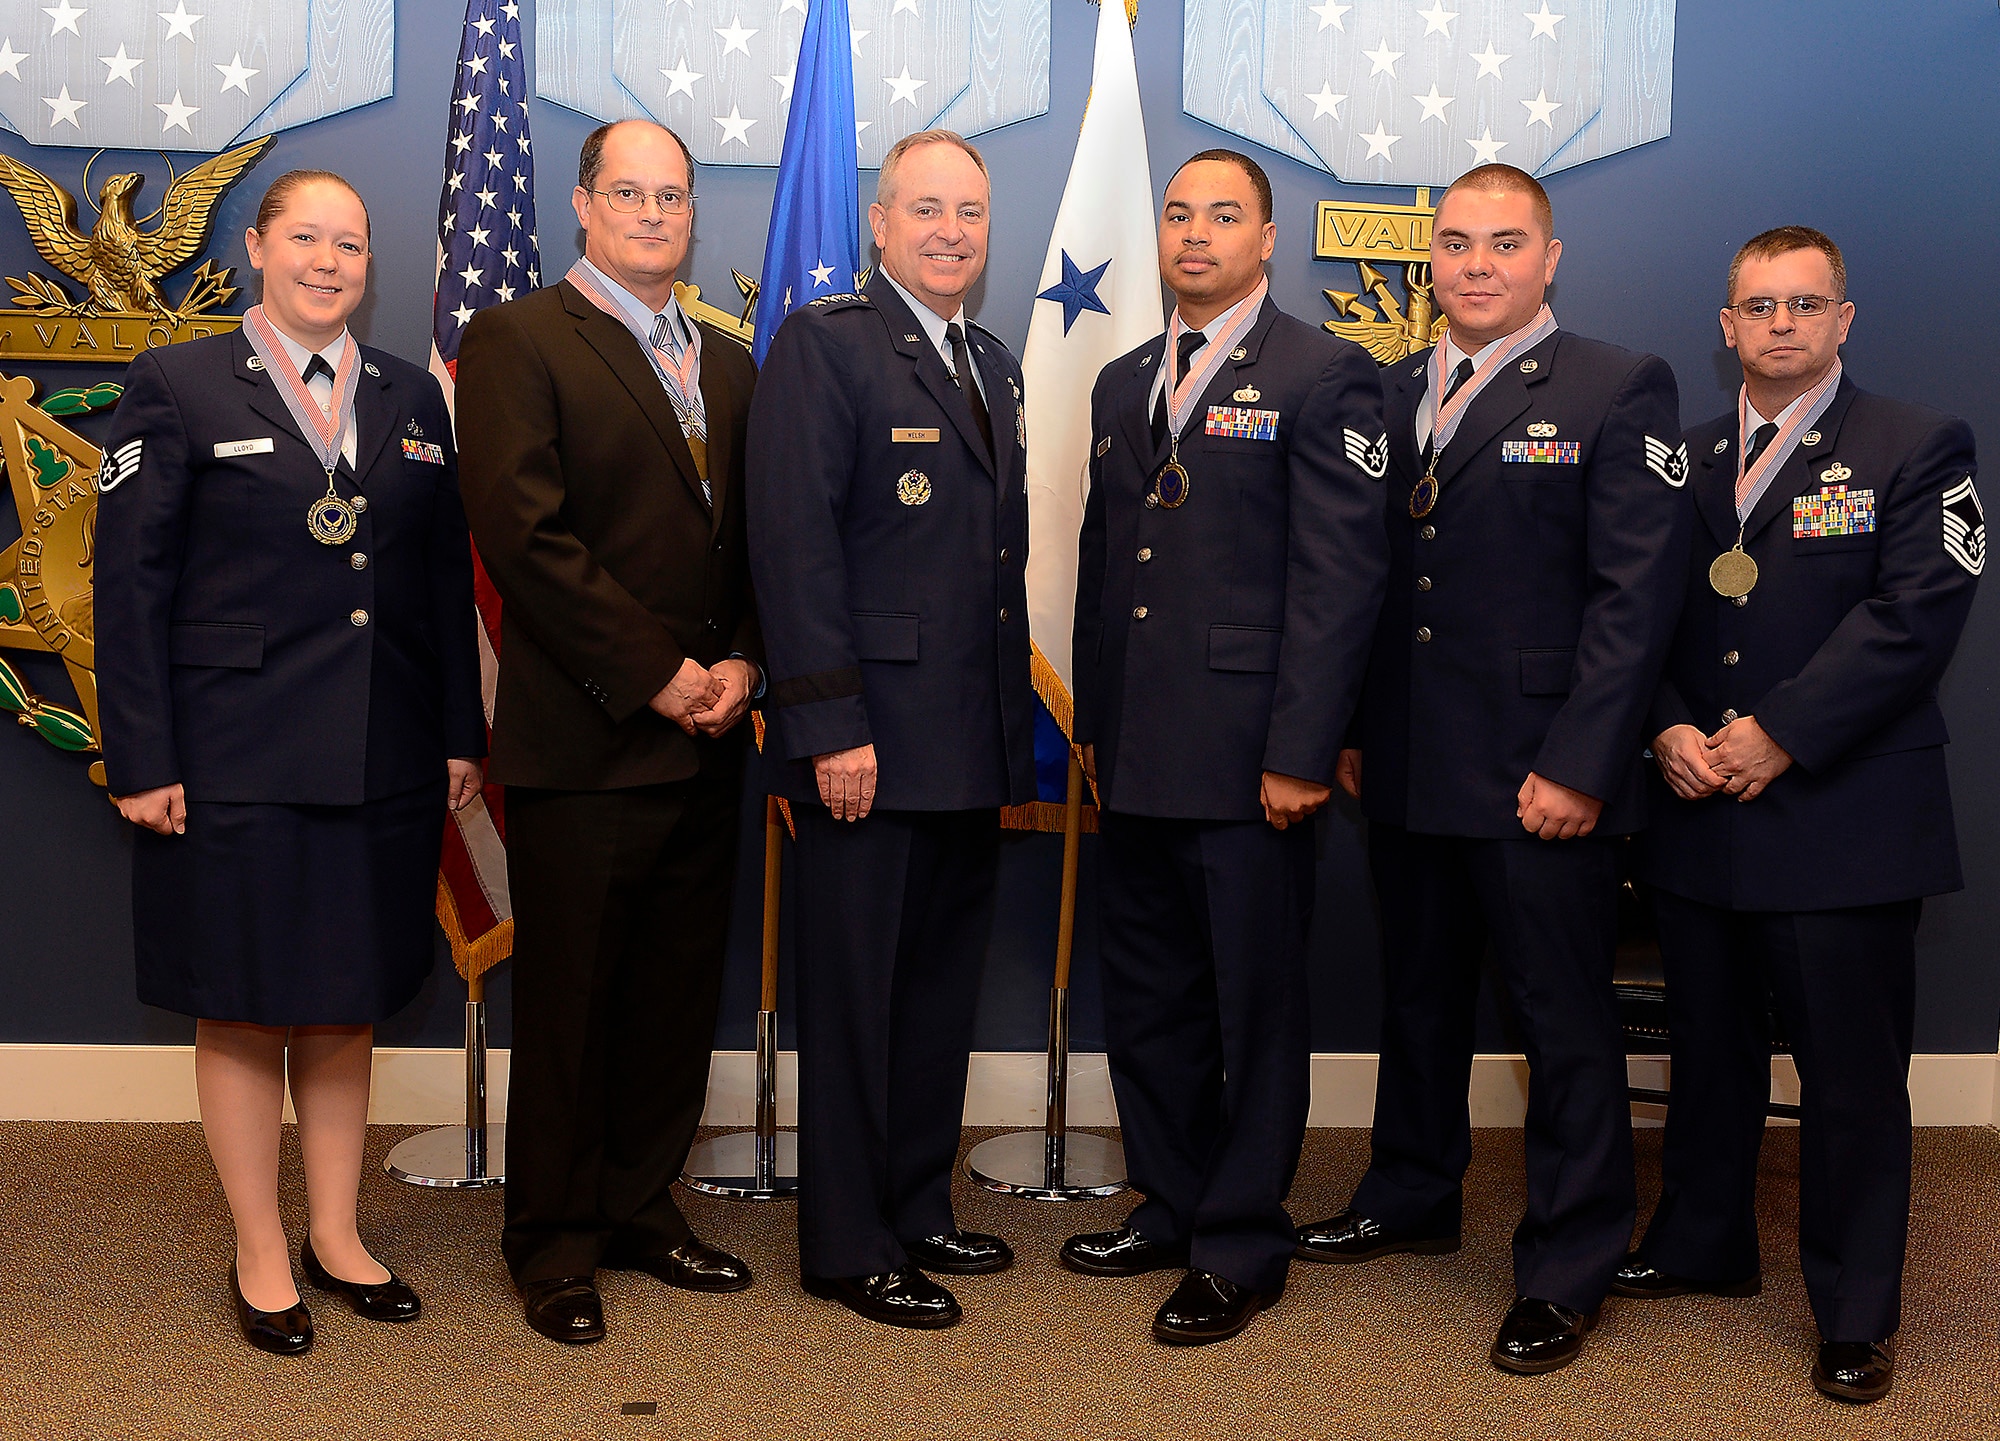 Members of the second runner-up of the 2012 Chief of Staff Team Excellence Award, the B-2 window Change Continuous Process Improvement Team from Whiteman Air Force Base, Mo., are congratulated by Air Force Chief of Staff Gen. Mark A. Welsh III in a Pentagon ceremony on Nov. 27, 2012.  (U.S. Air Force photo/Scott M. Ash)

